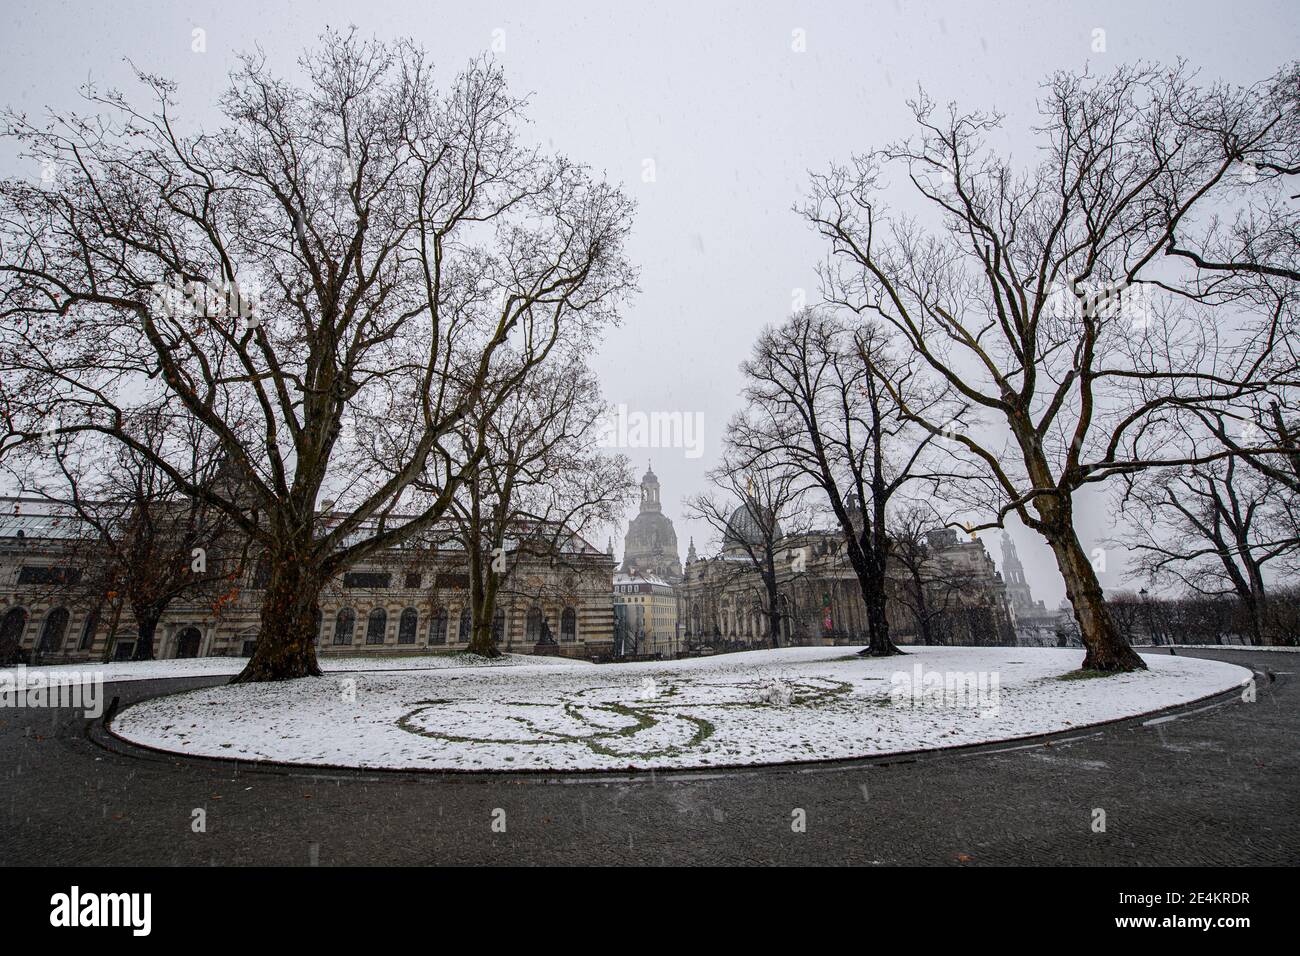 24 January 2021, Saxony, Dresden: Snow rain falls on Sunday at noon at the Brühlsche Terrasse with the Albertinum (l-r), the Frauenkirche, the Lipsius Building, the Academy of Fine Arts and the Hofkirche. Photo: Robert Michael/dpa-Zentralbild/ZB Stock Photo